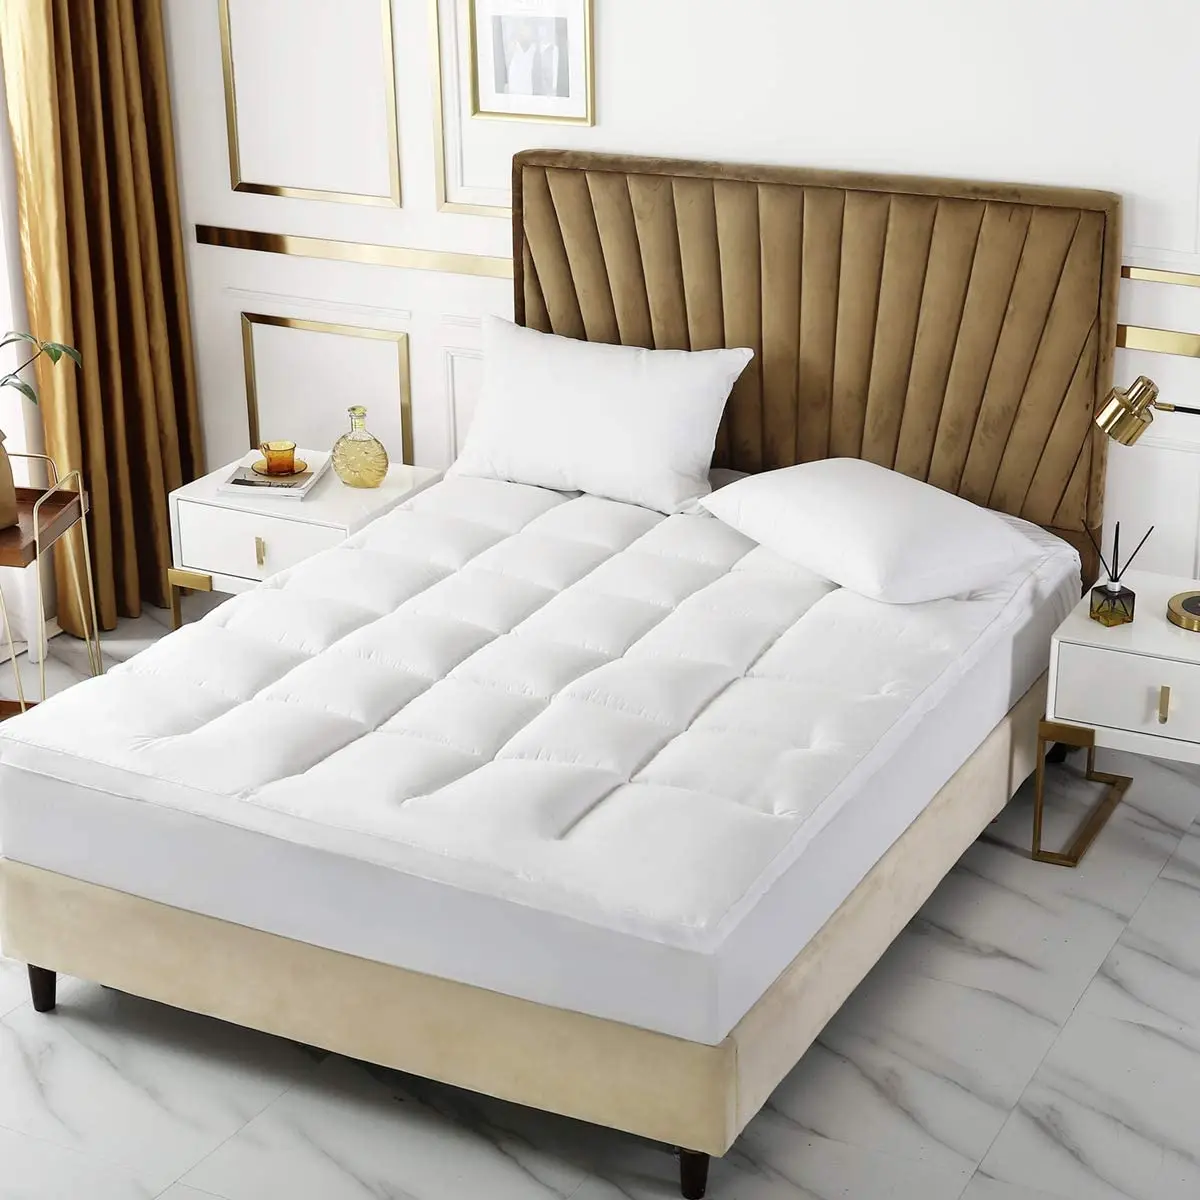 Sleeping Partner King Bed White Feather and Down Mattress Topper/Pad